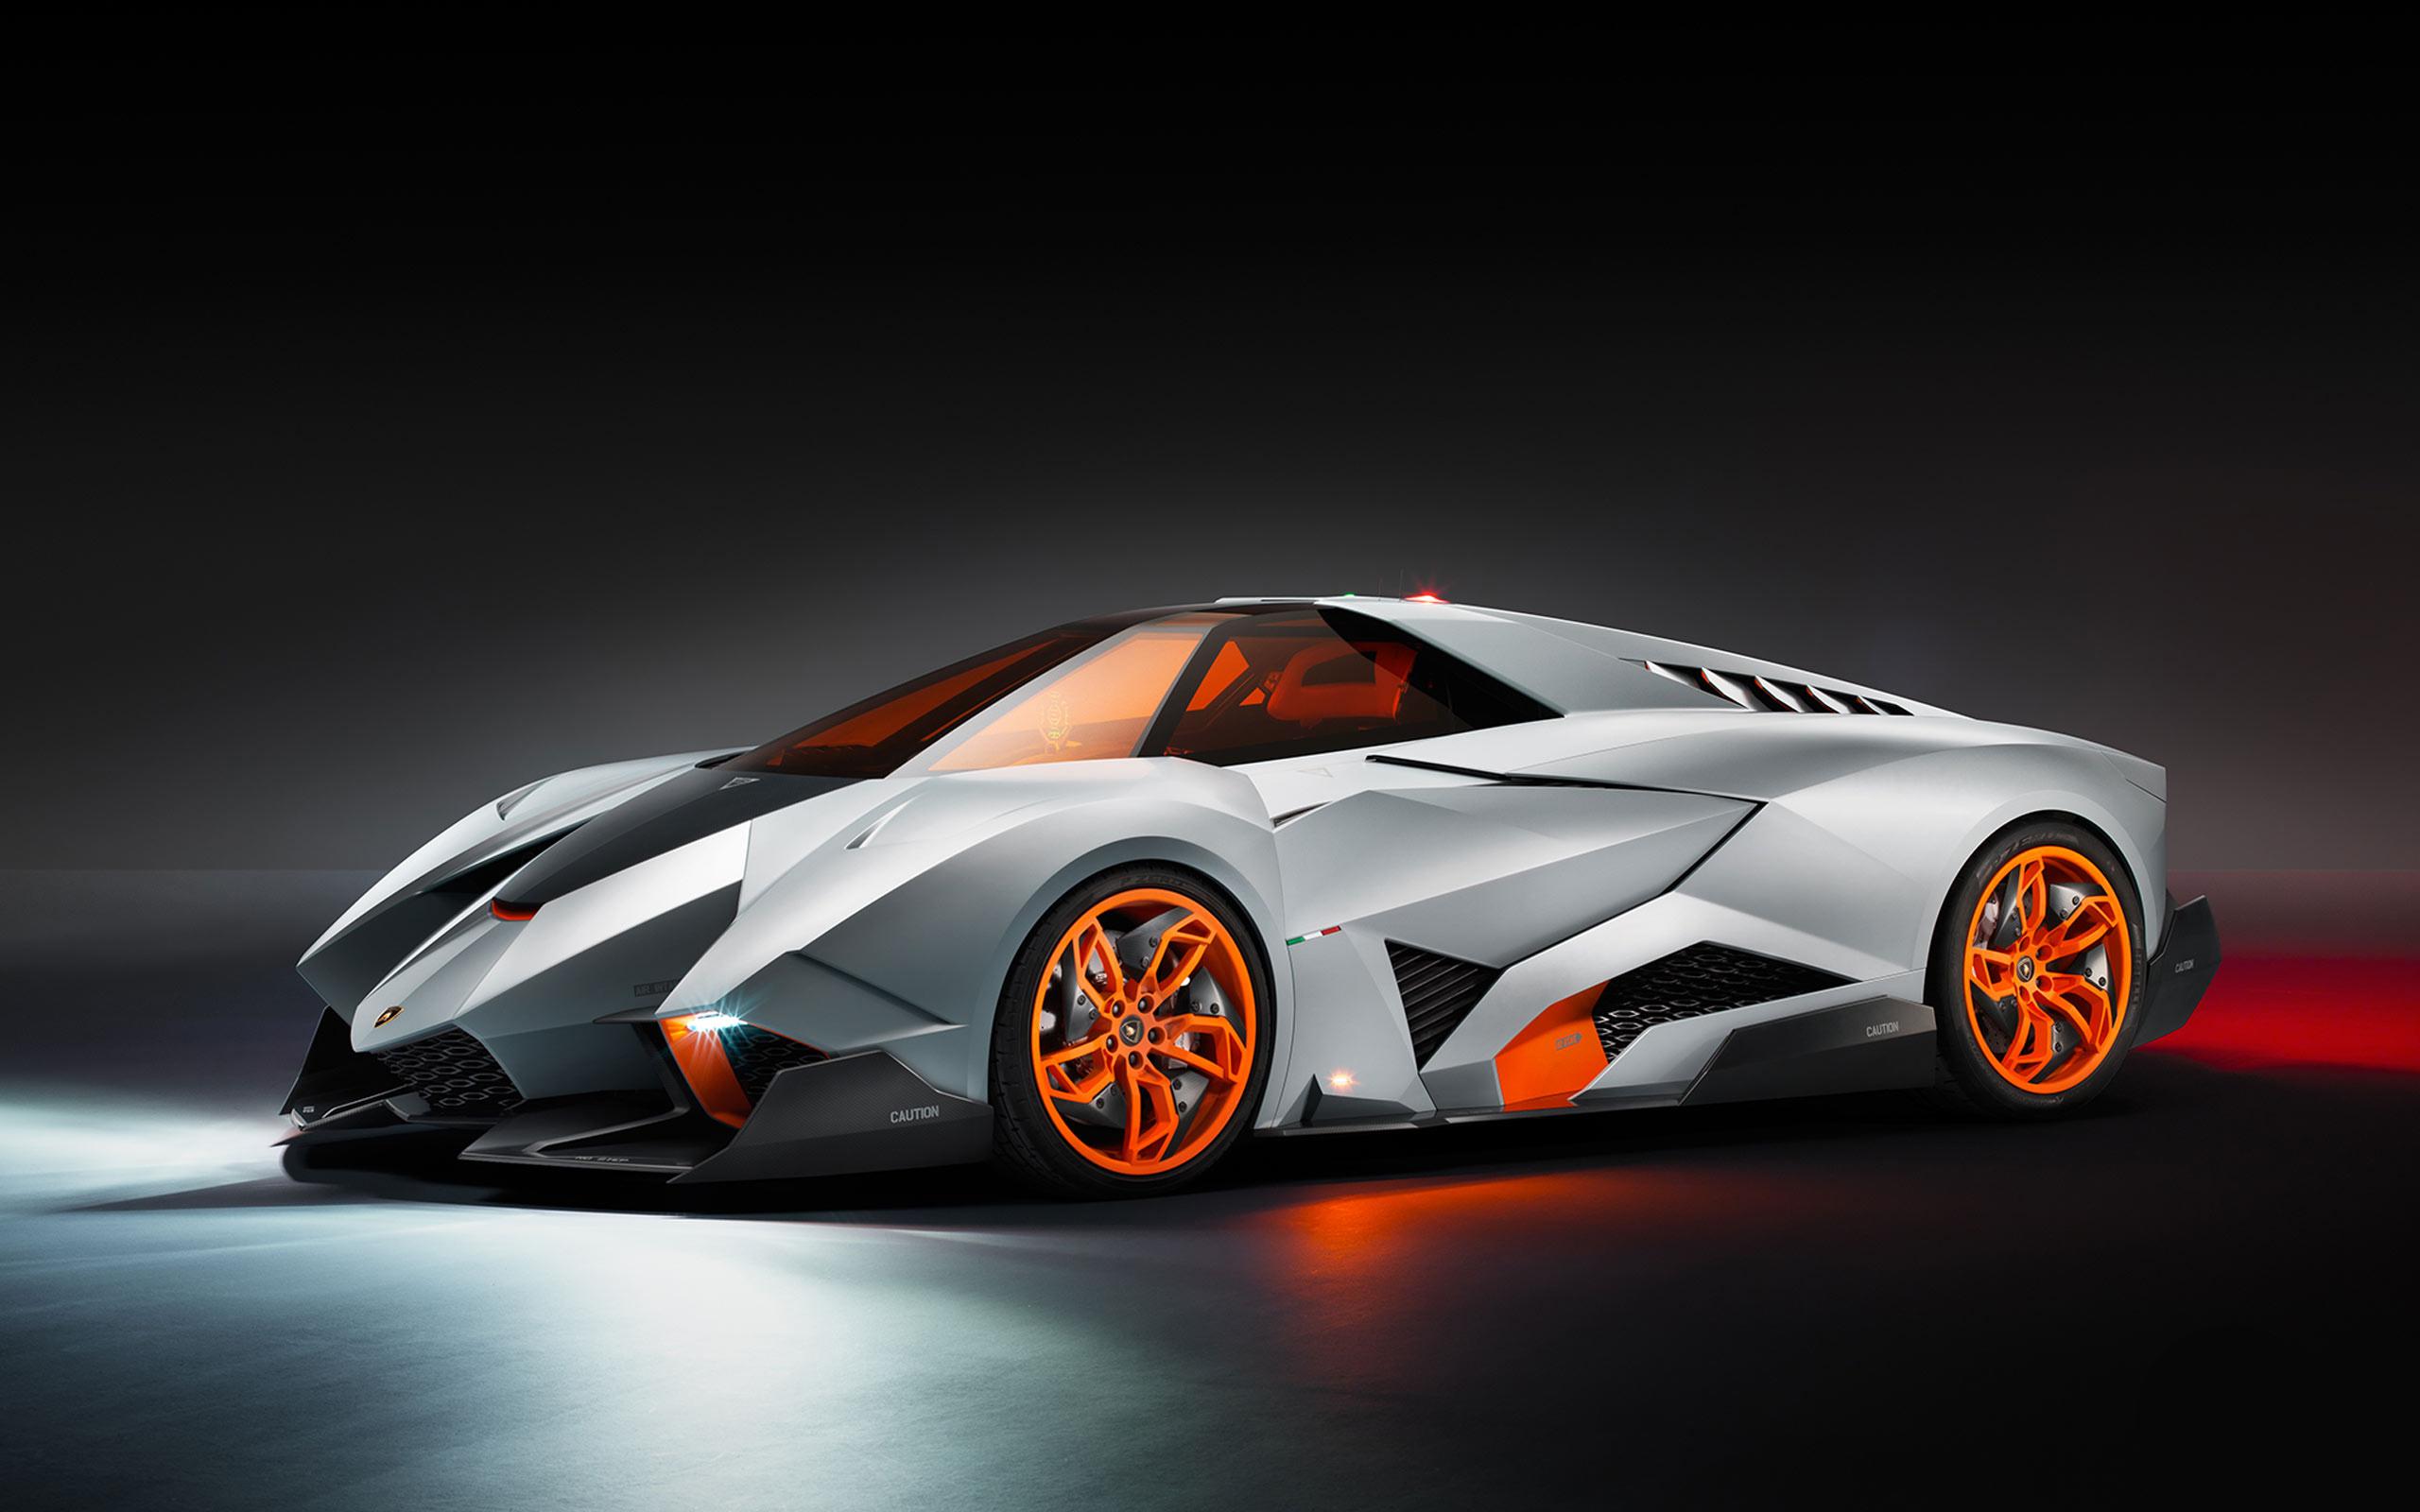 Home Cars Vehicules Cars Cool Car Backgrounds Lambo